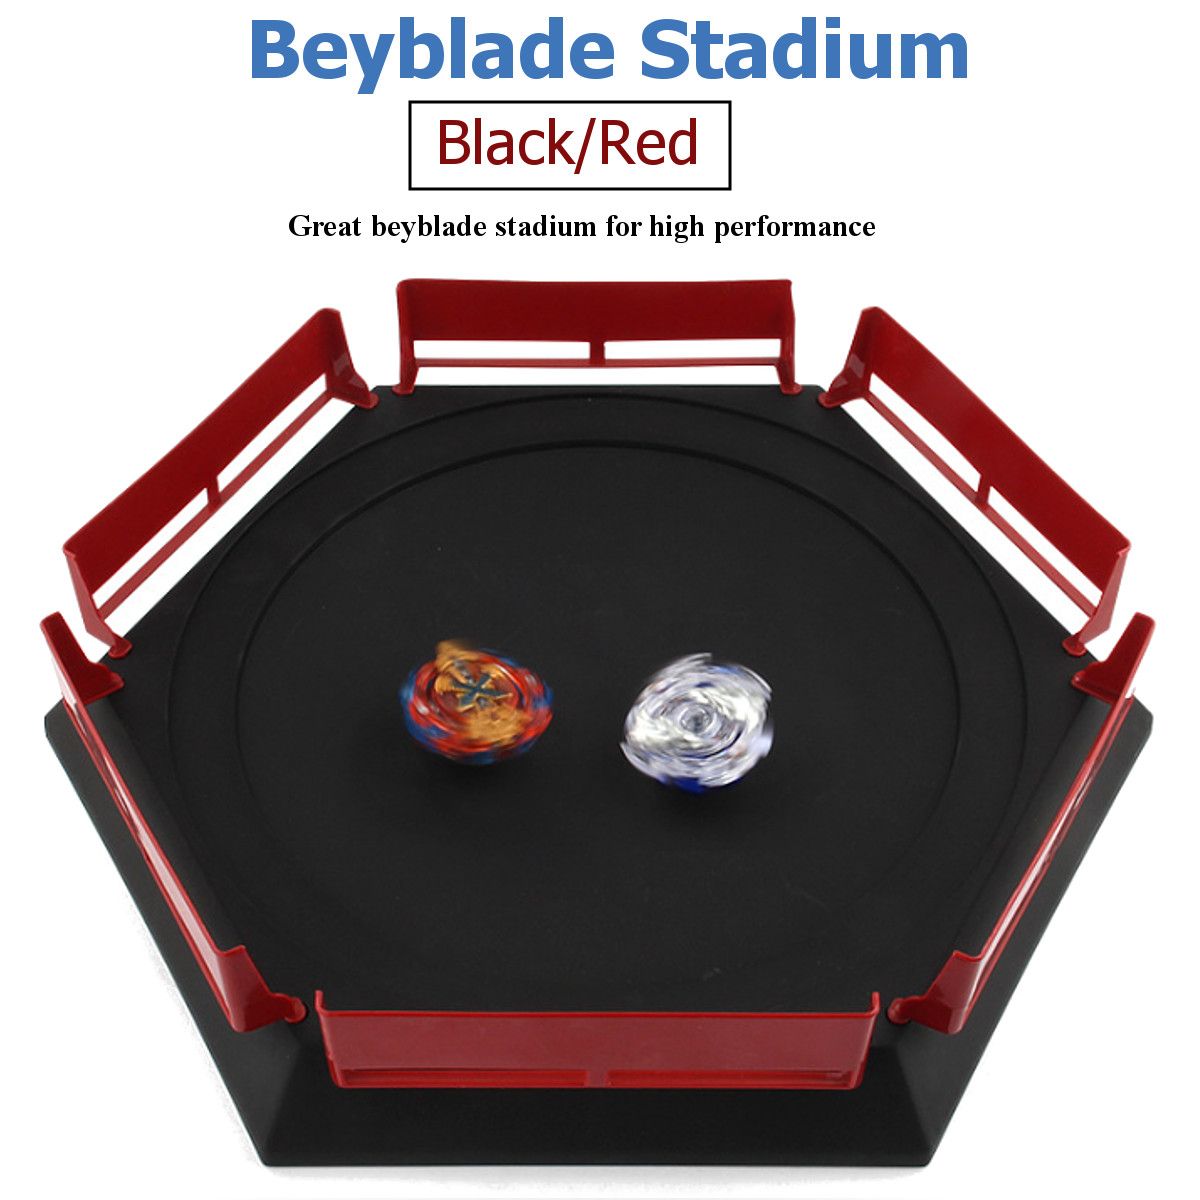 Burst-Gyro-Arena-Disk-Vovomay-Exciting-Duel-Spinning-Top-Beyblades-Launcher-Stadium-1390439